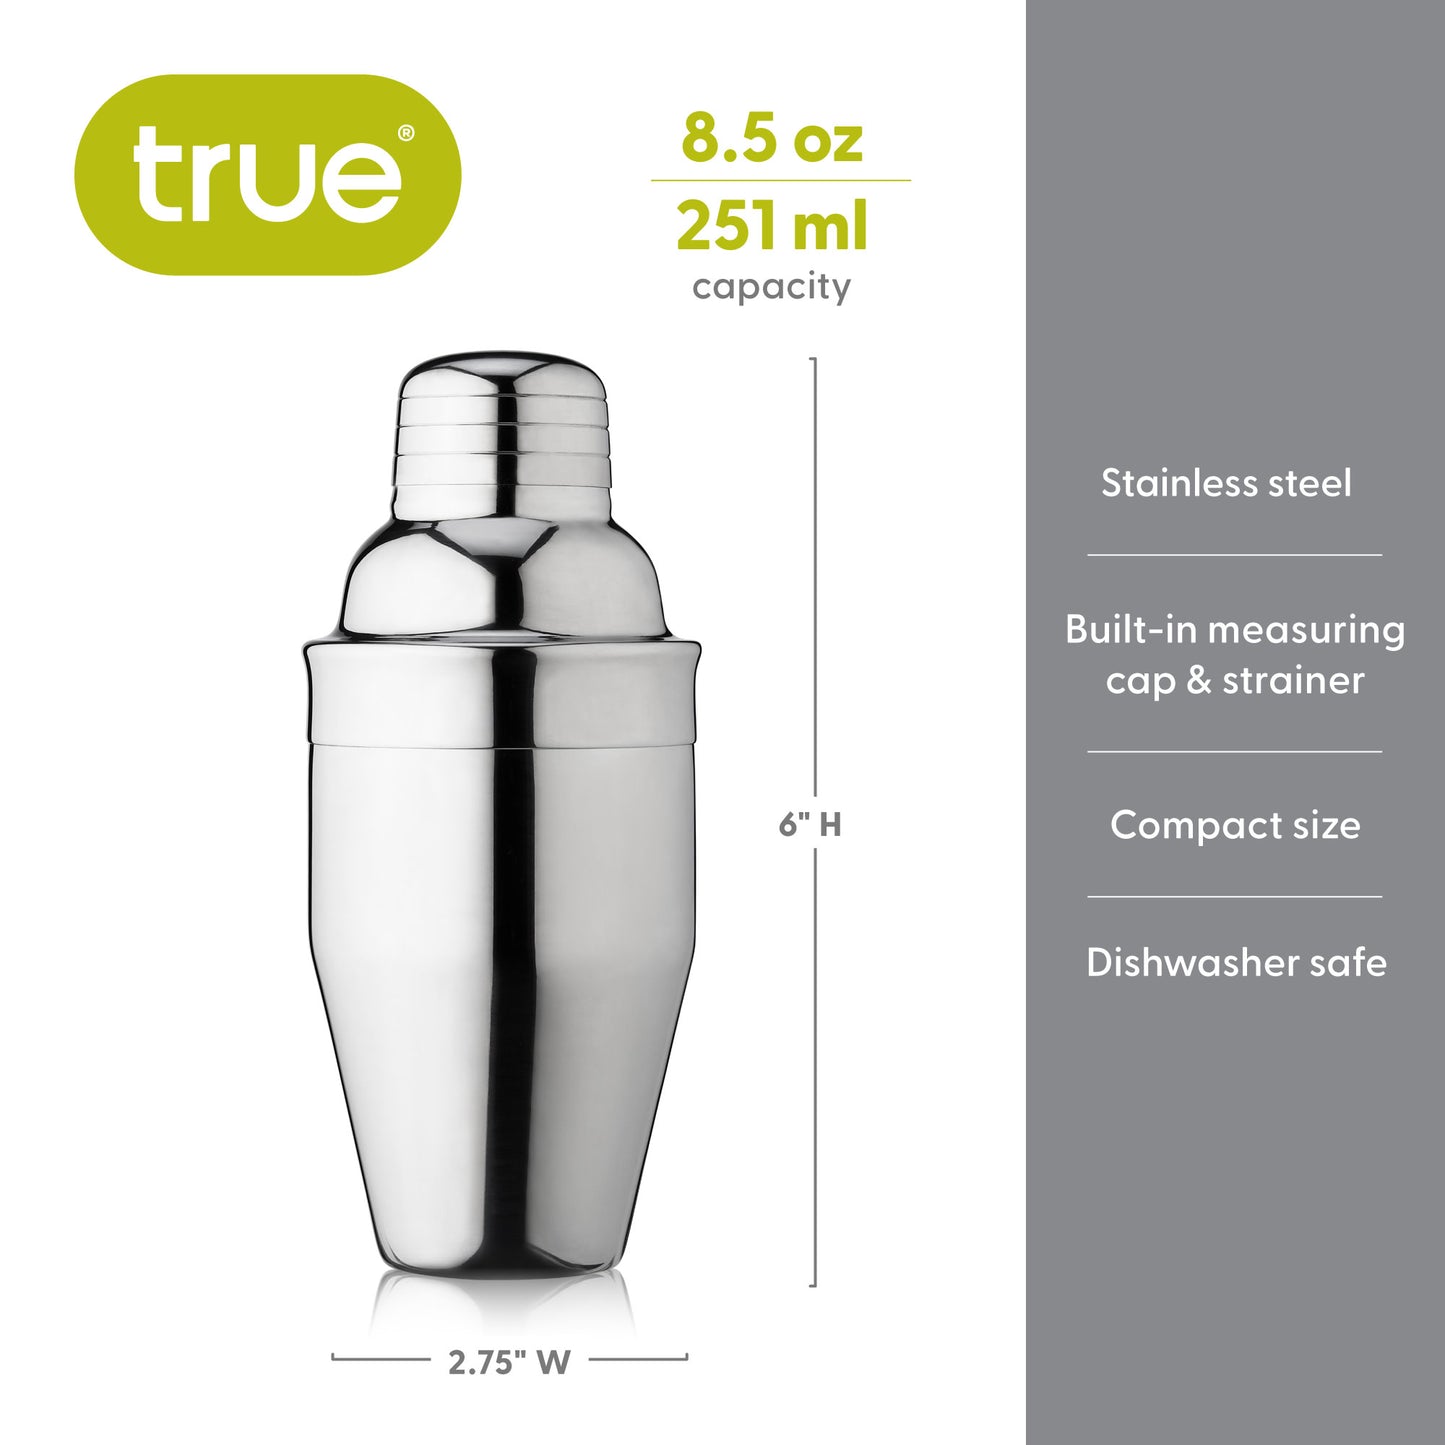 8.5 oz Stainless Steel Cocktail Shaker by True